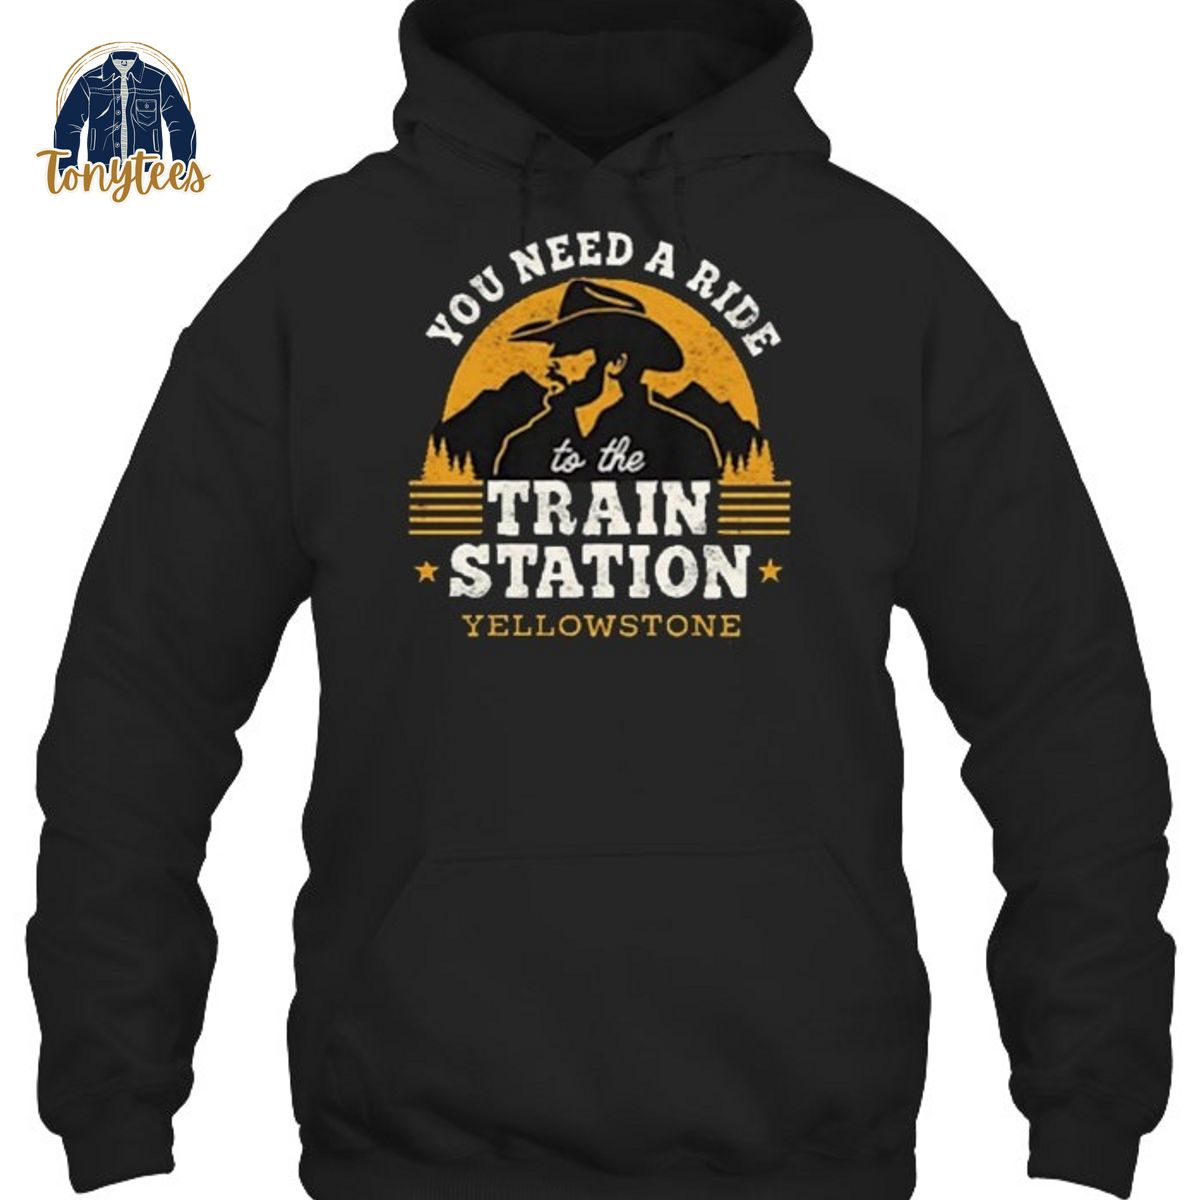 You need a ride to the train station Yellowstone shirty